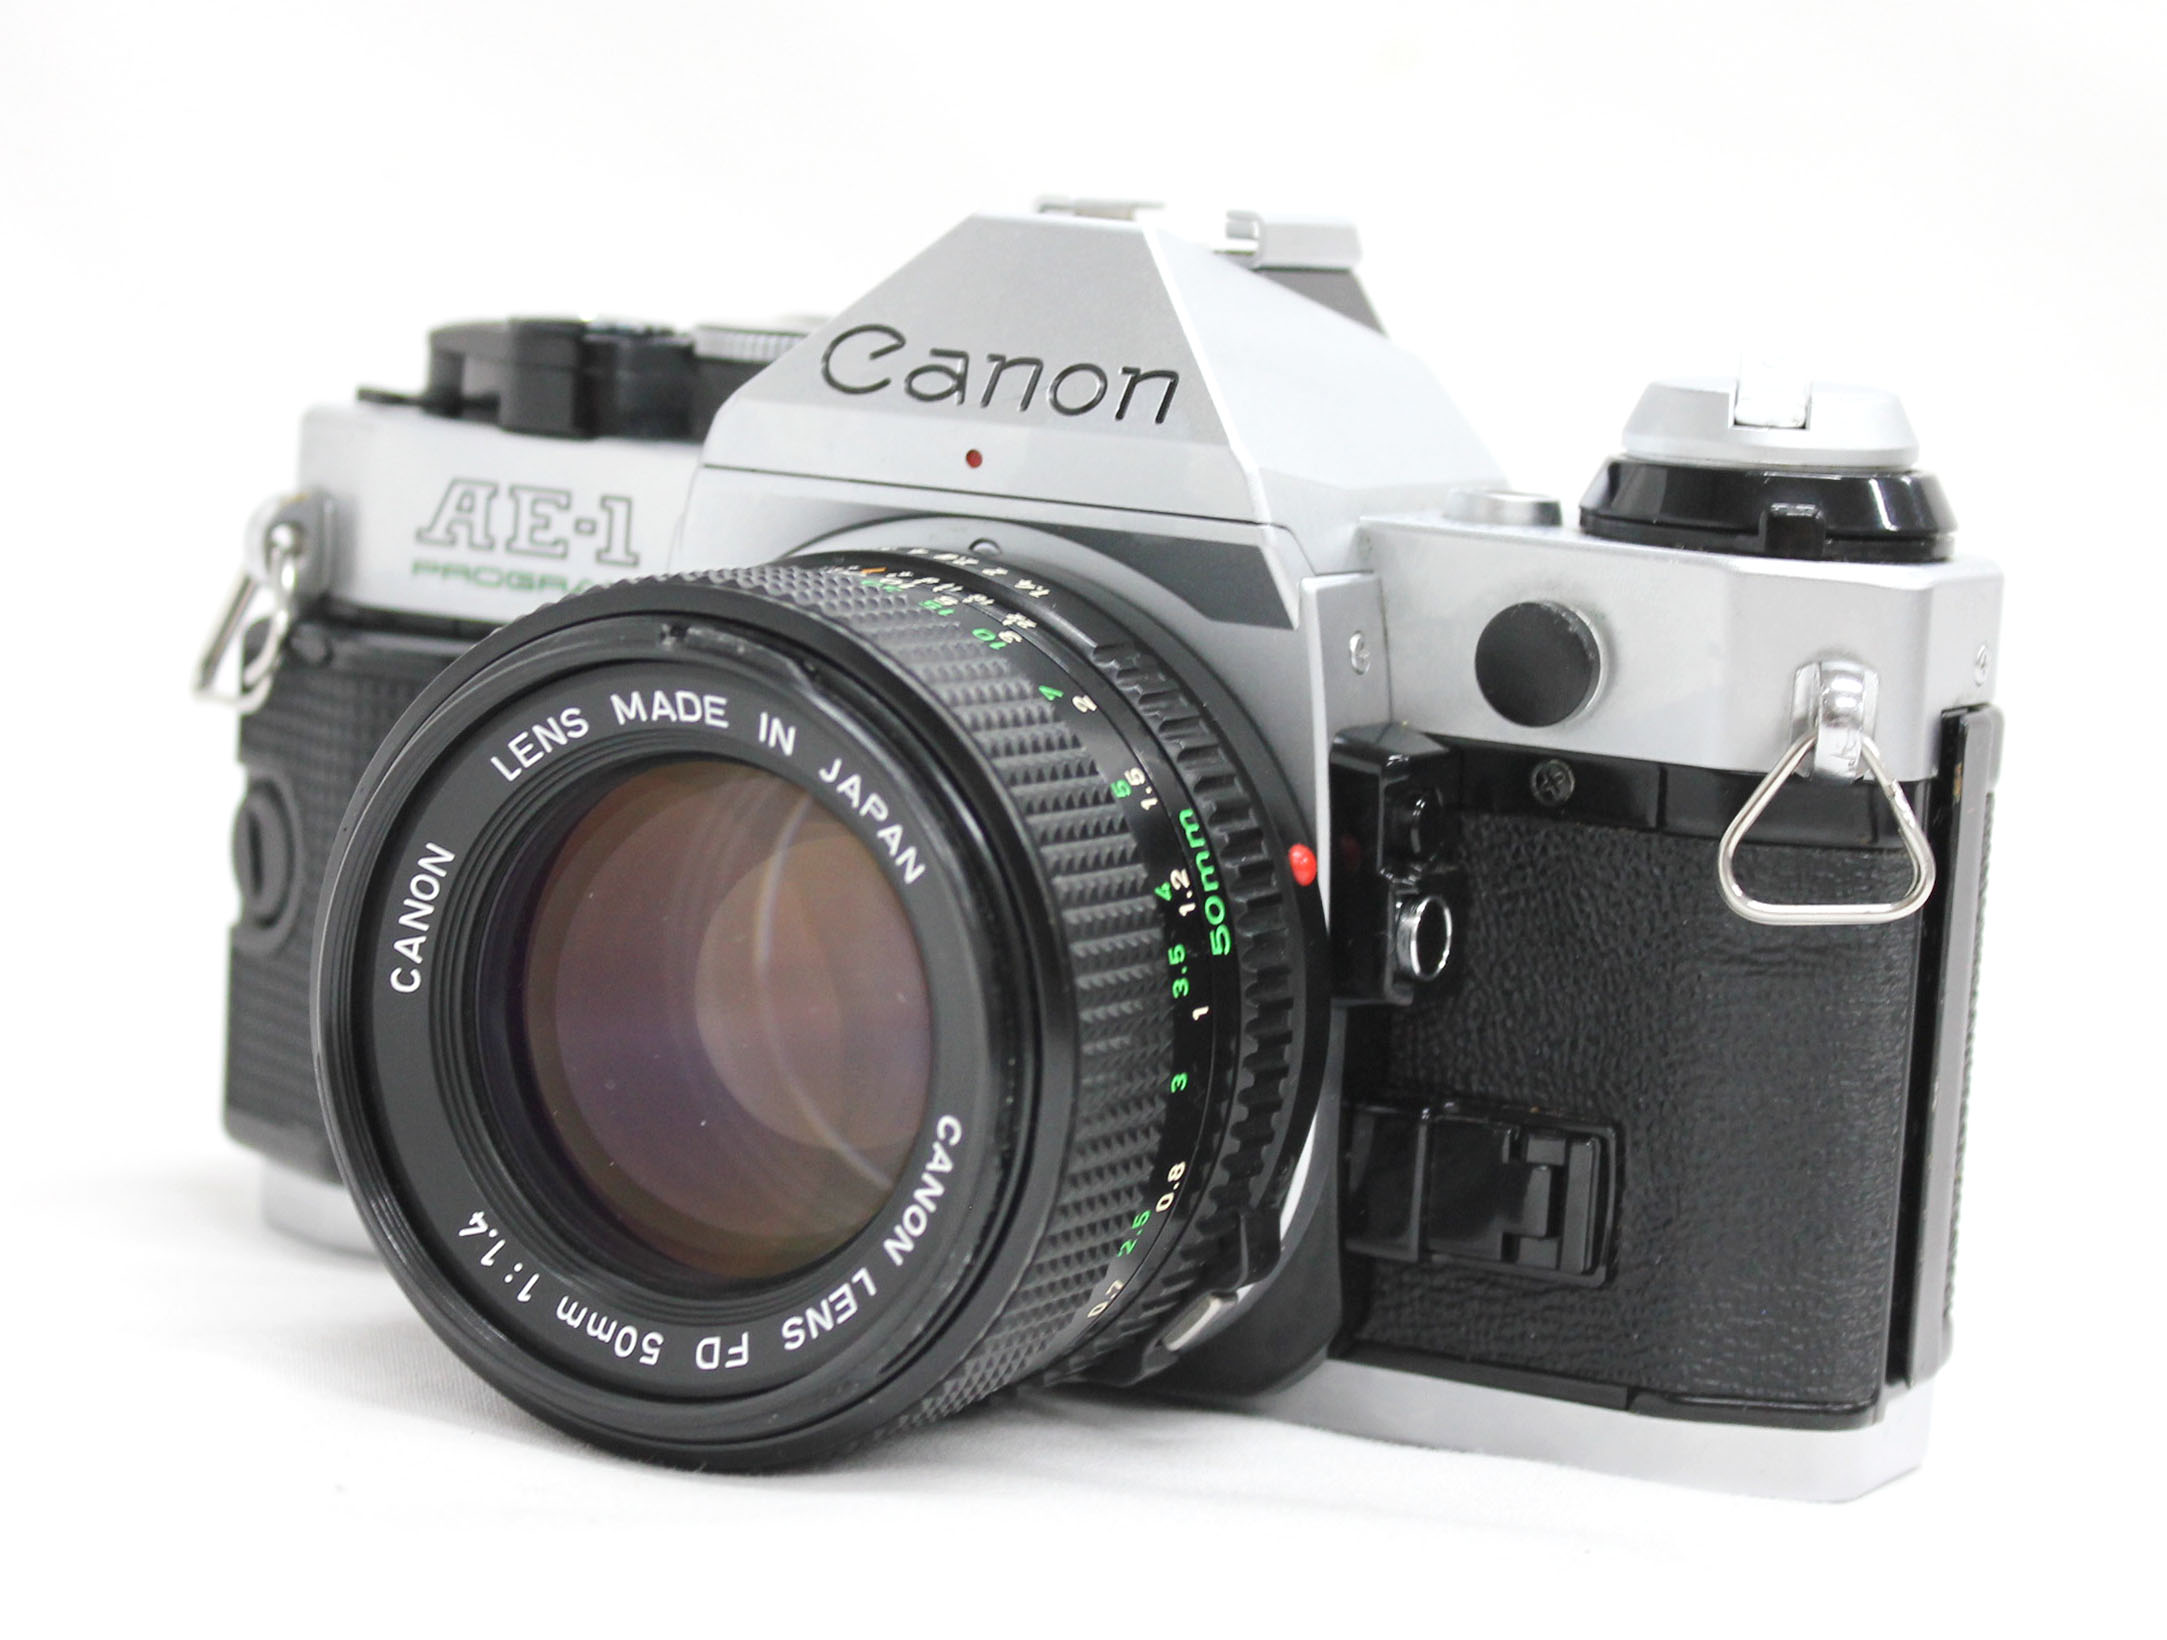 Japan Used Camera Shop | Canon AE-1 Program 35mm SLR Film Camera with New FD NFD 50mm F/1.4 Lens from Japan